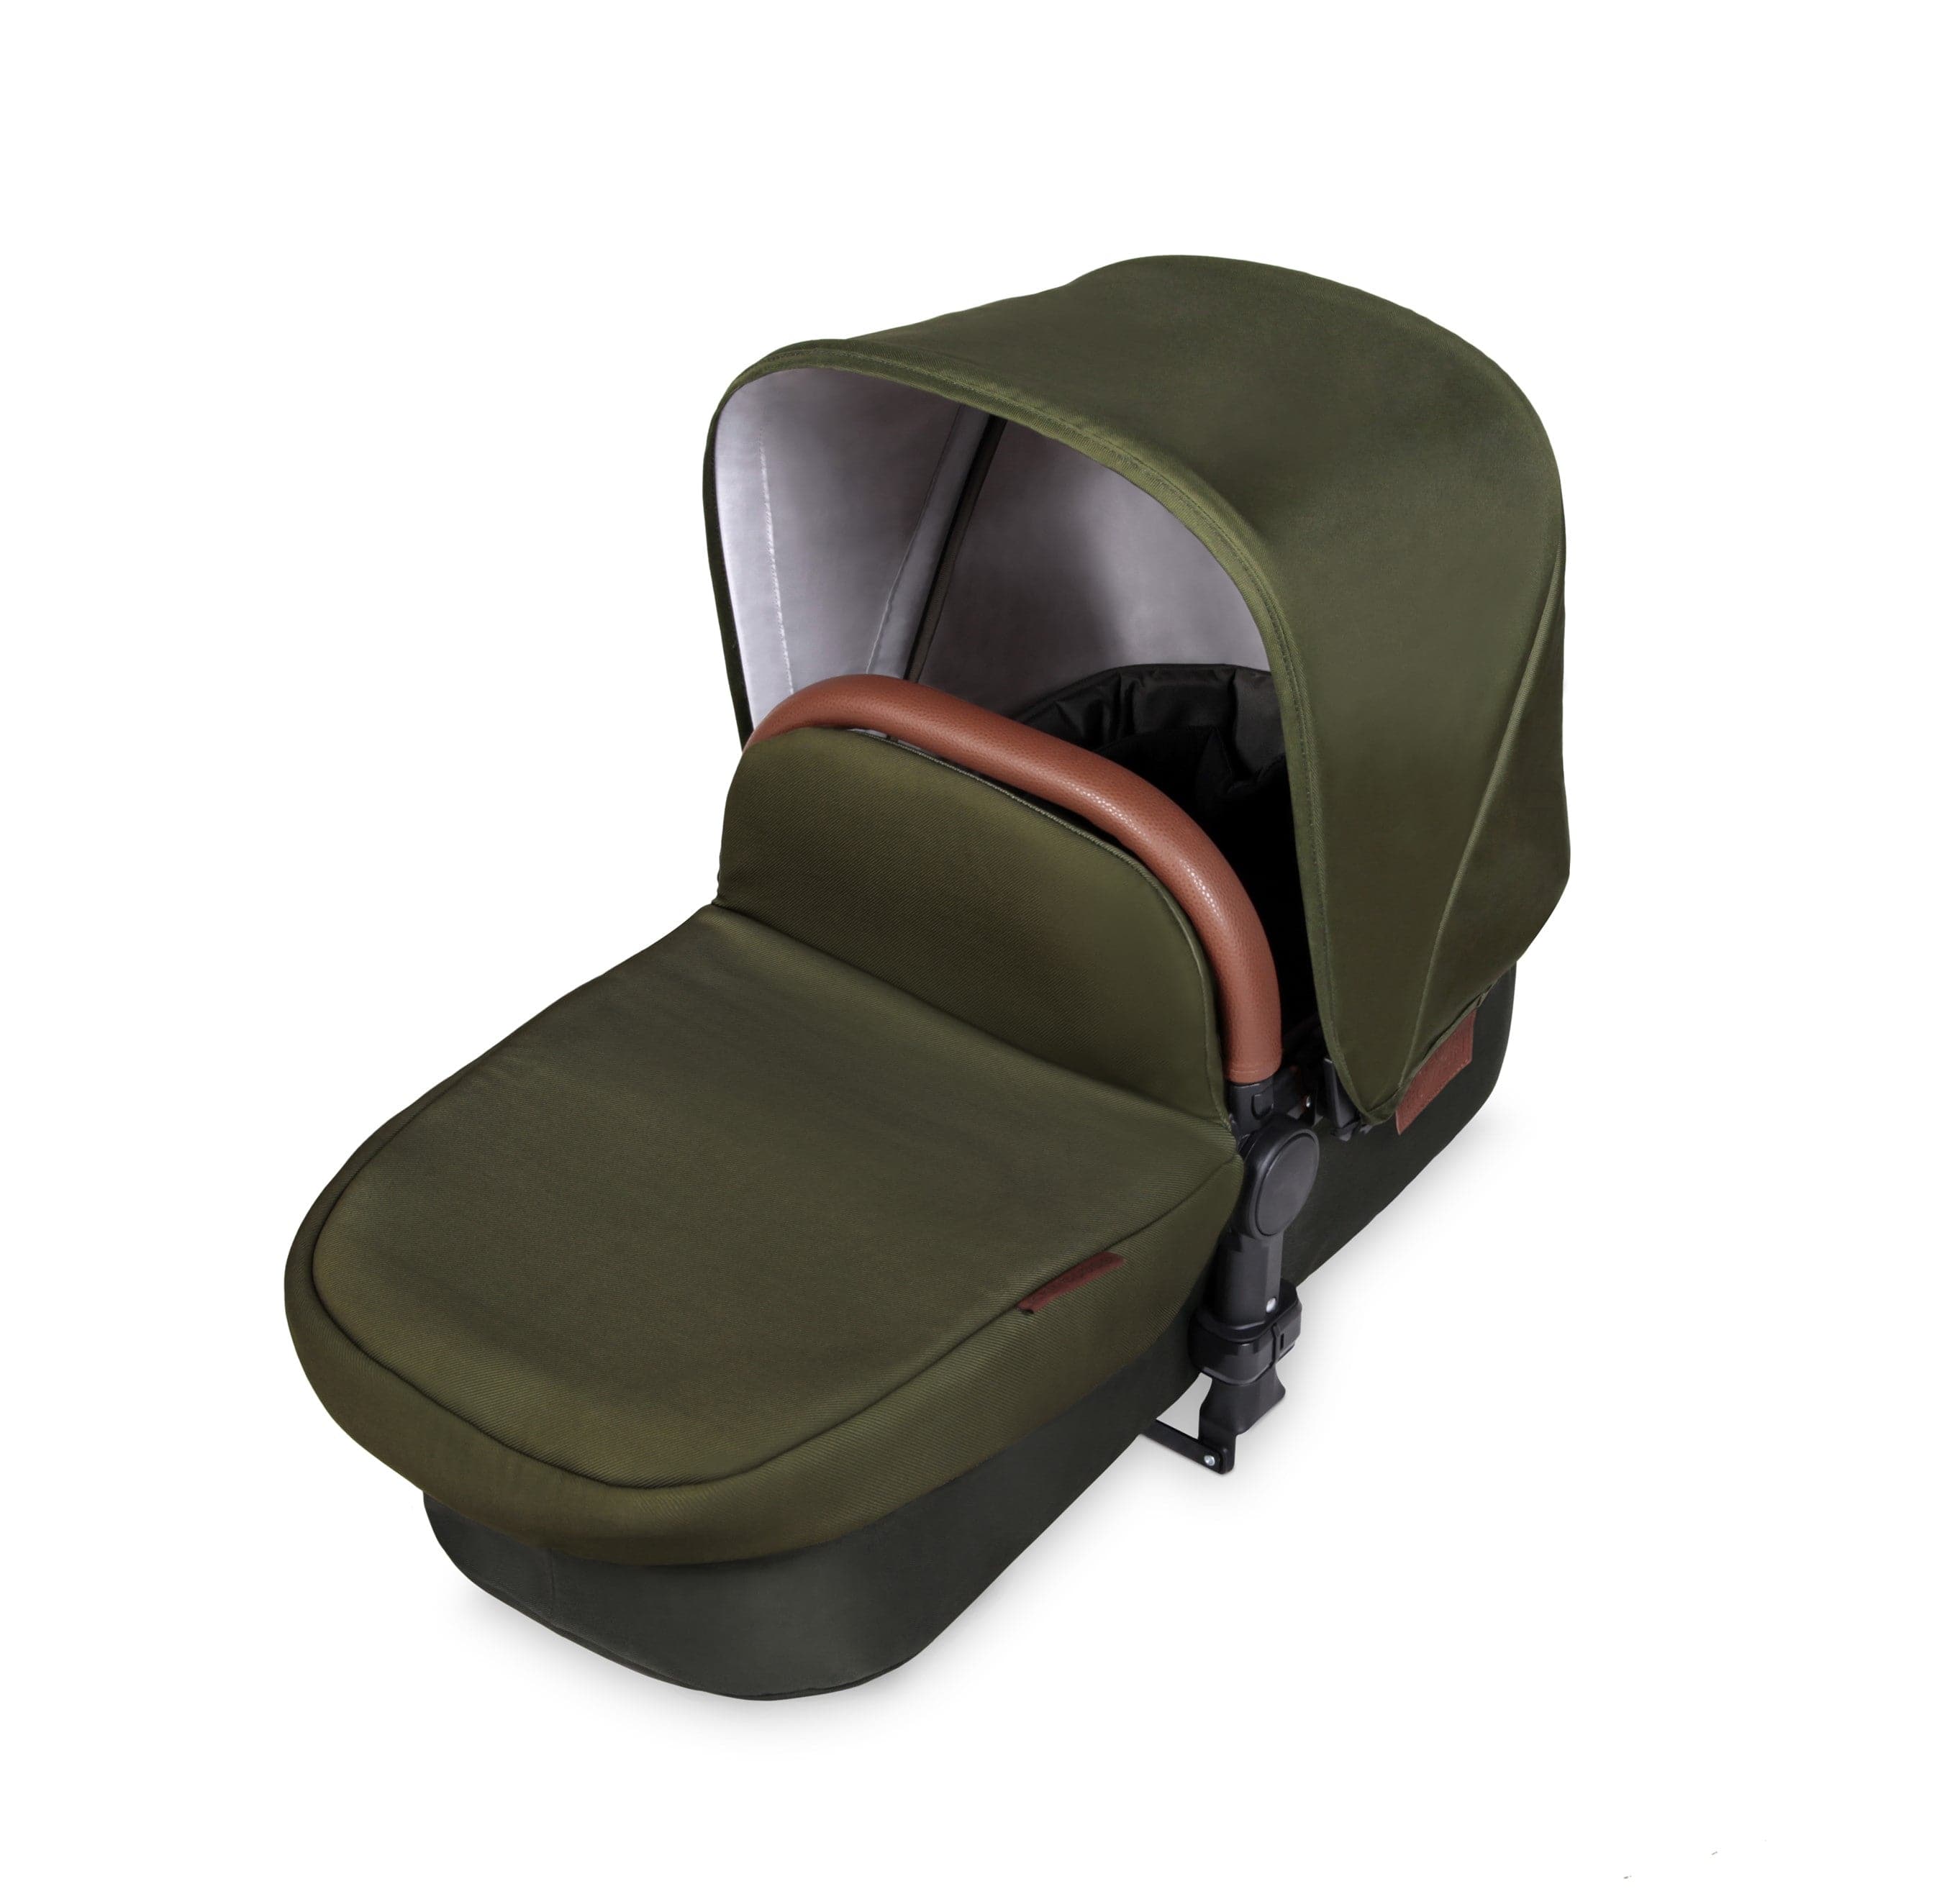 Ickle Bubba Stomp V4 2 In 1 Carrycot & Pushchair - Chrome / Woodland -  | For Your Little One